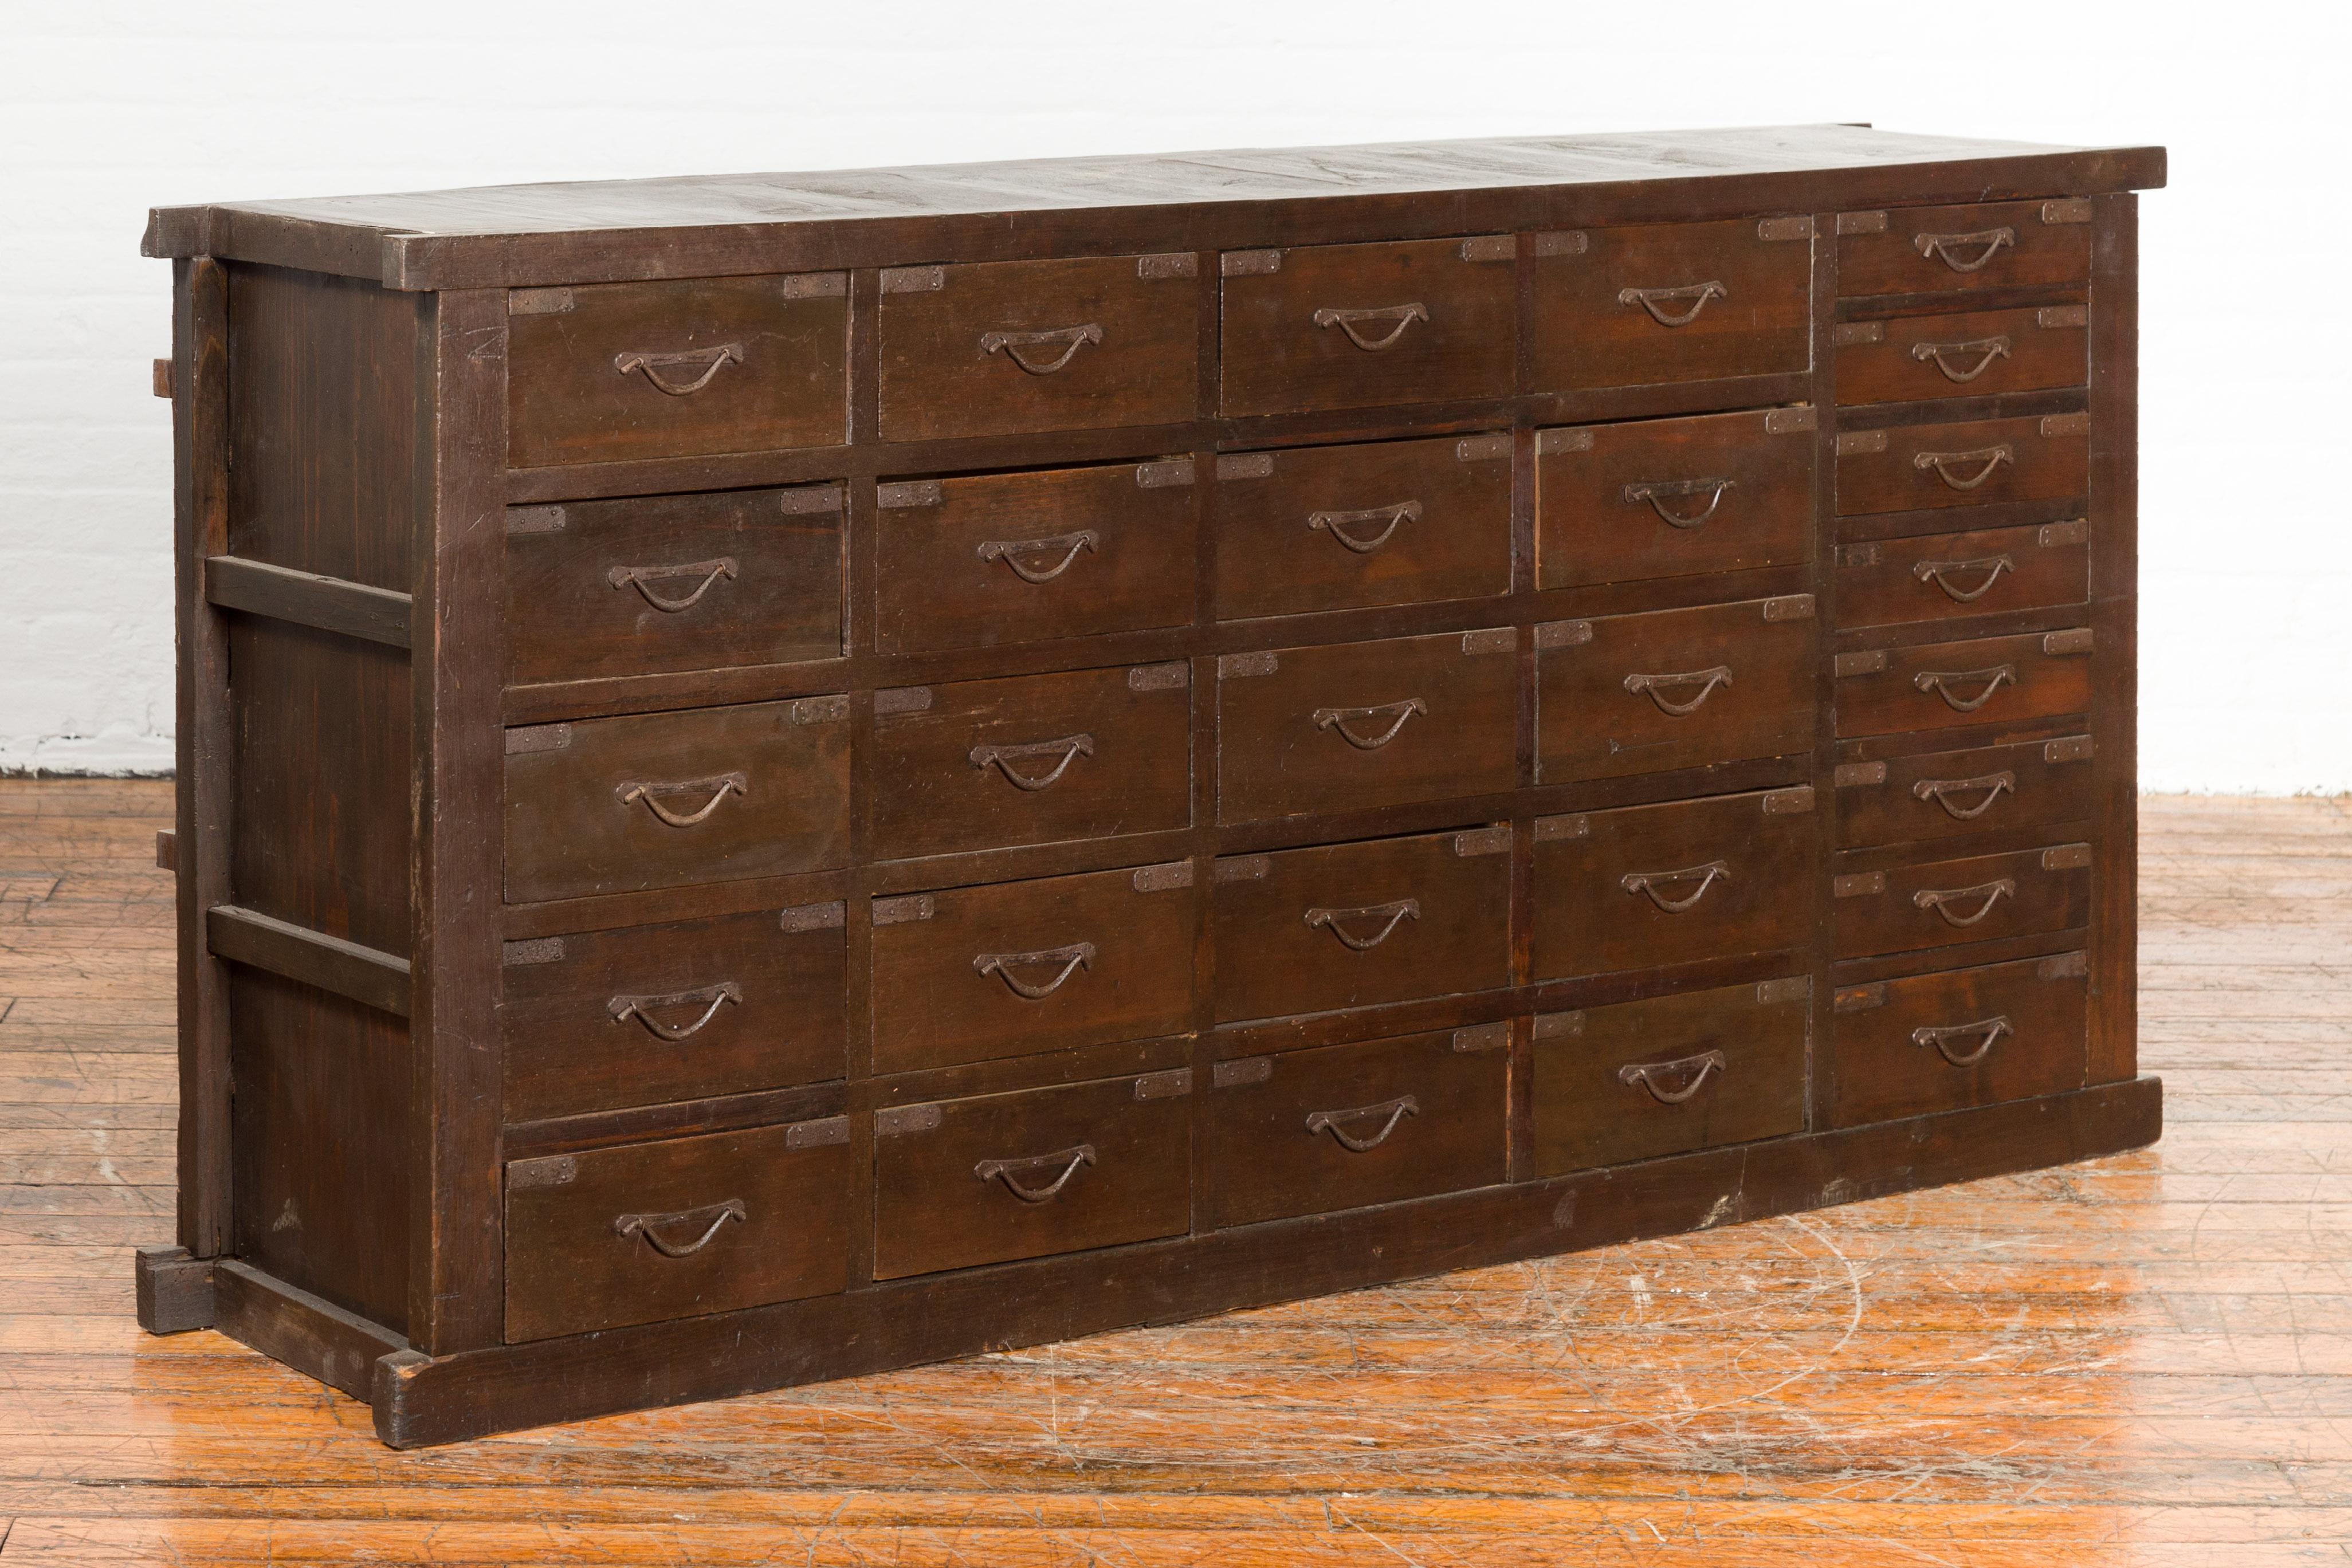 Japanese Early 20th Century Apothecary Chest with 28 Drawers and Brown Patina 9